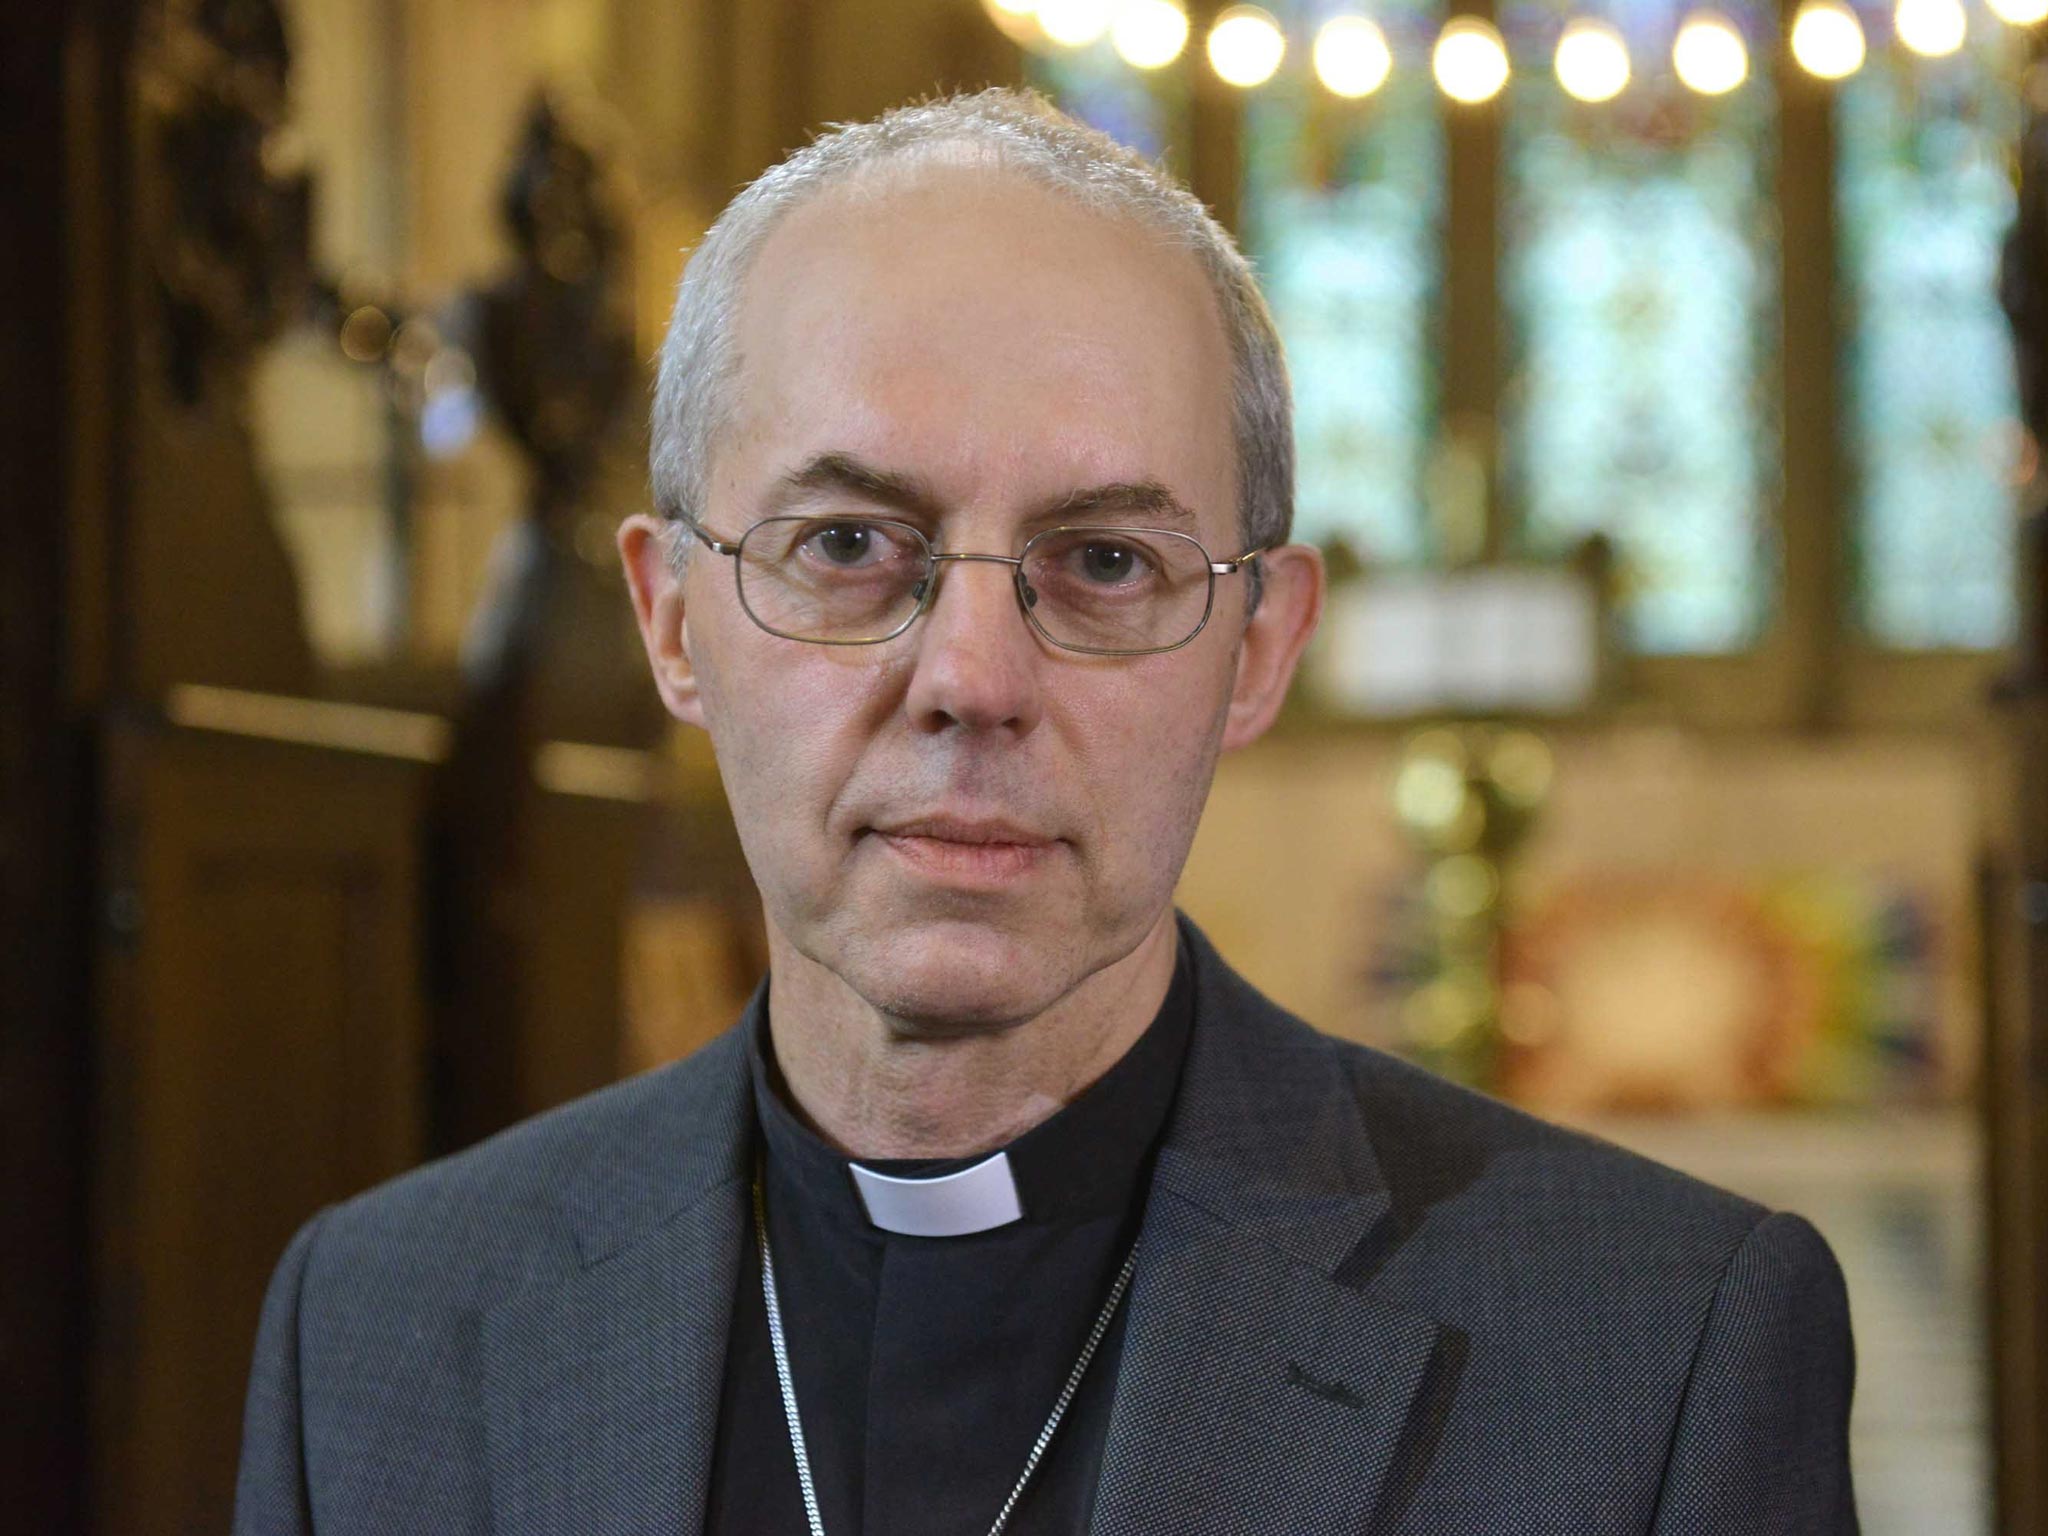 The Archbishop of Canterbury, Justin Welby, was being interviewed by Andrew Marr